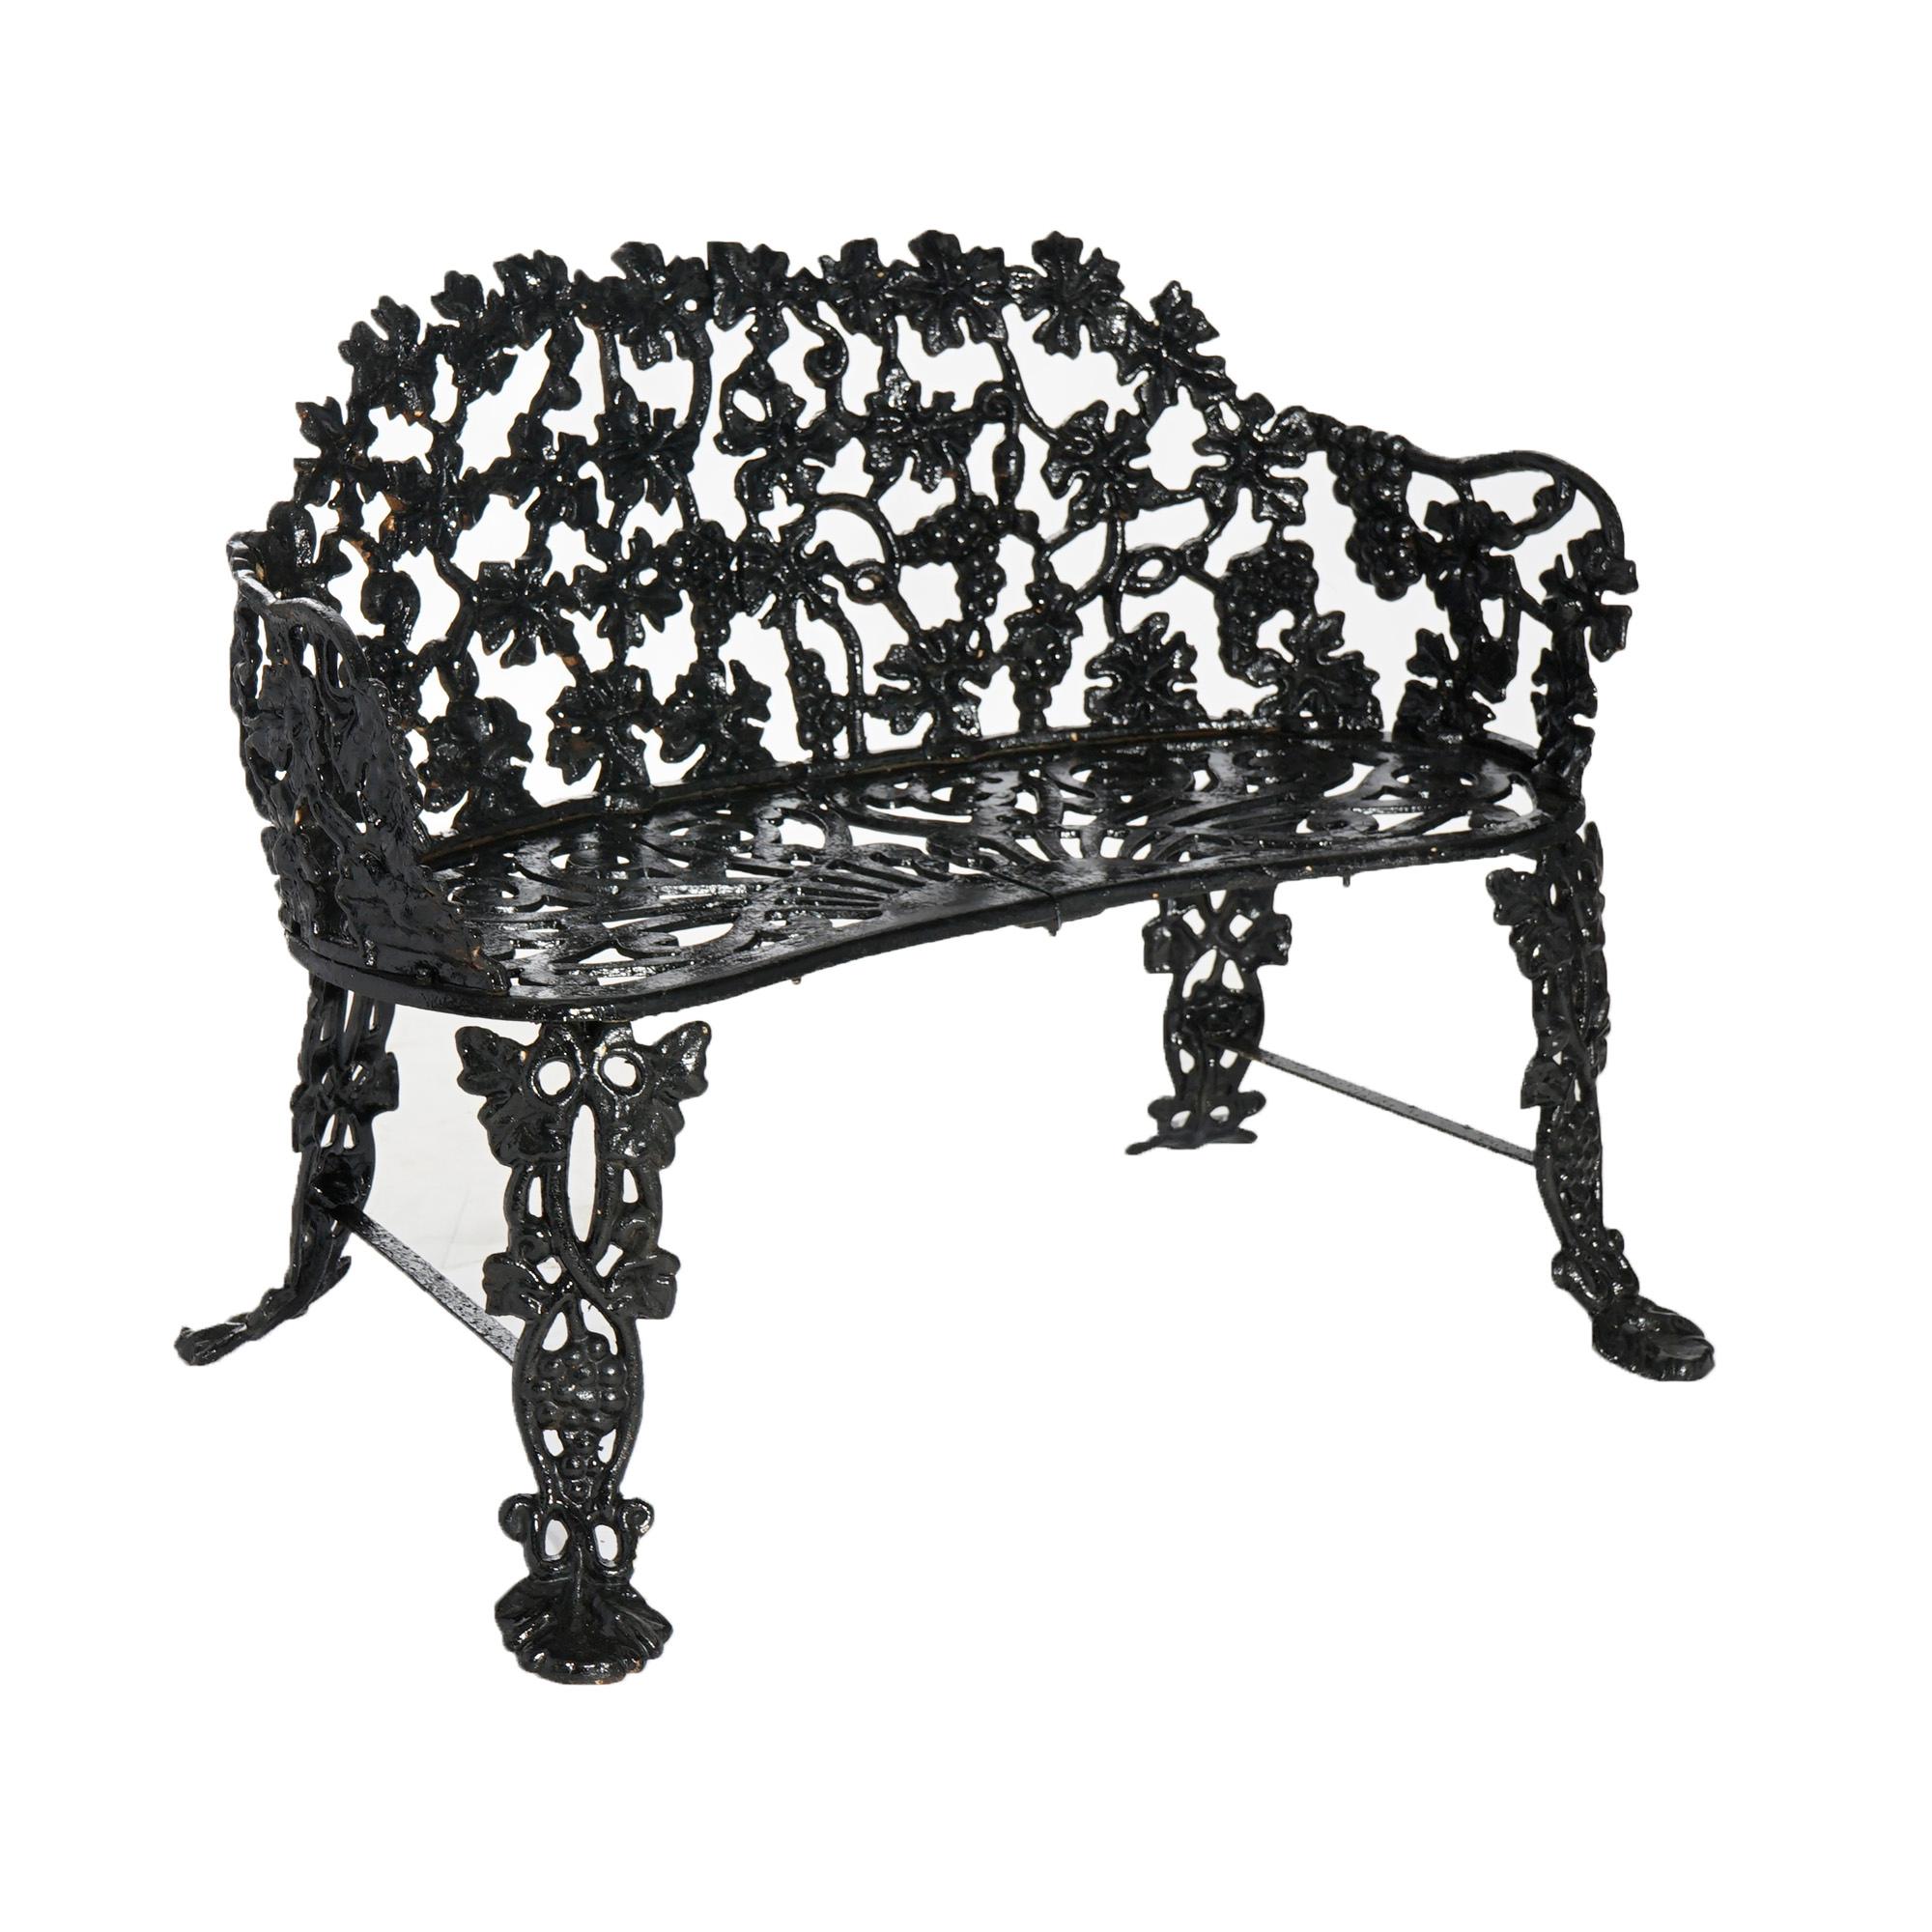 An antique garden bench offers cast iron construction in grape and leaf pattern, painted black, c1940.

Measures- 28''H x 37''W x 24.5''D.

*Ask about DISCOUNTED DELIVERY rates within 1,500 miles of NY*